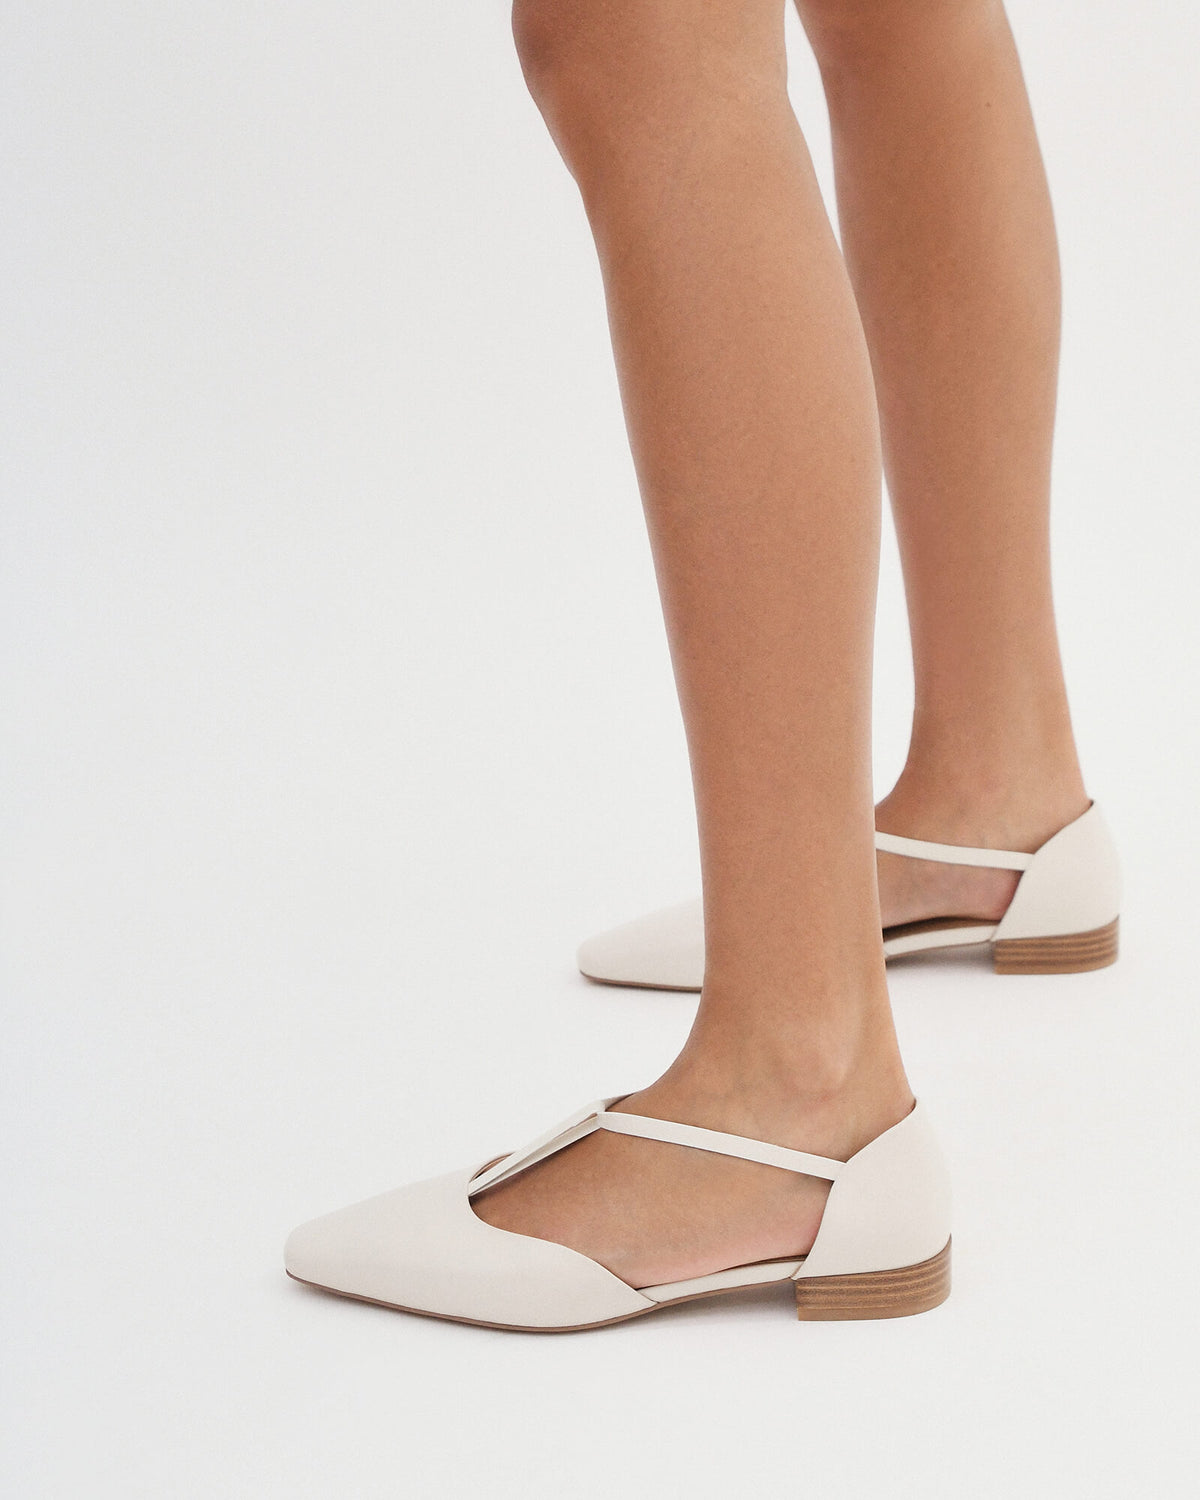 LOUIE DRESS FLATS OFF WHITE LEATHER